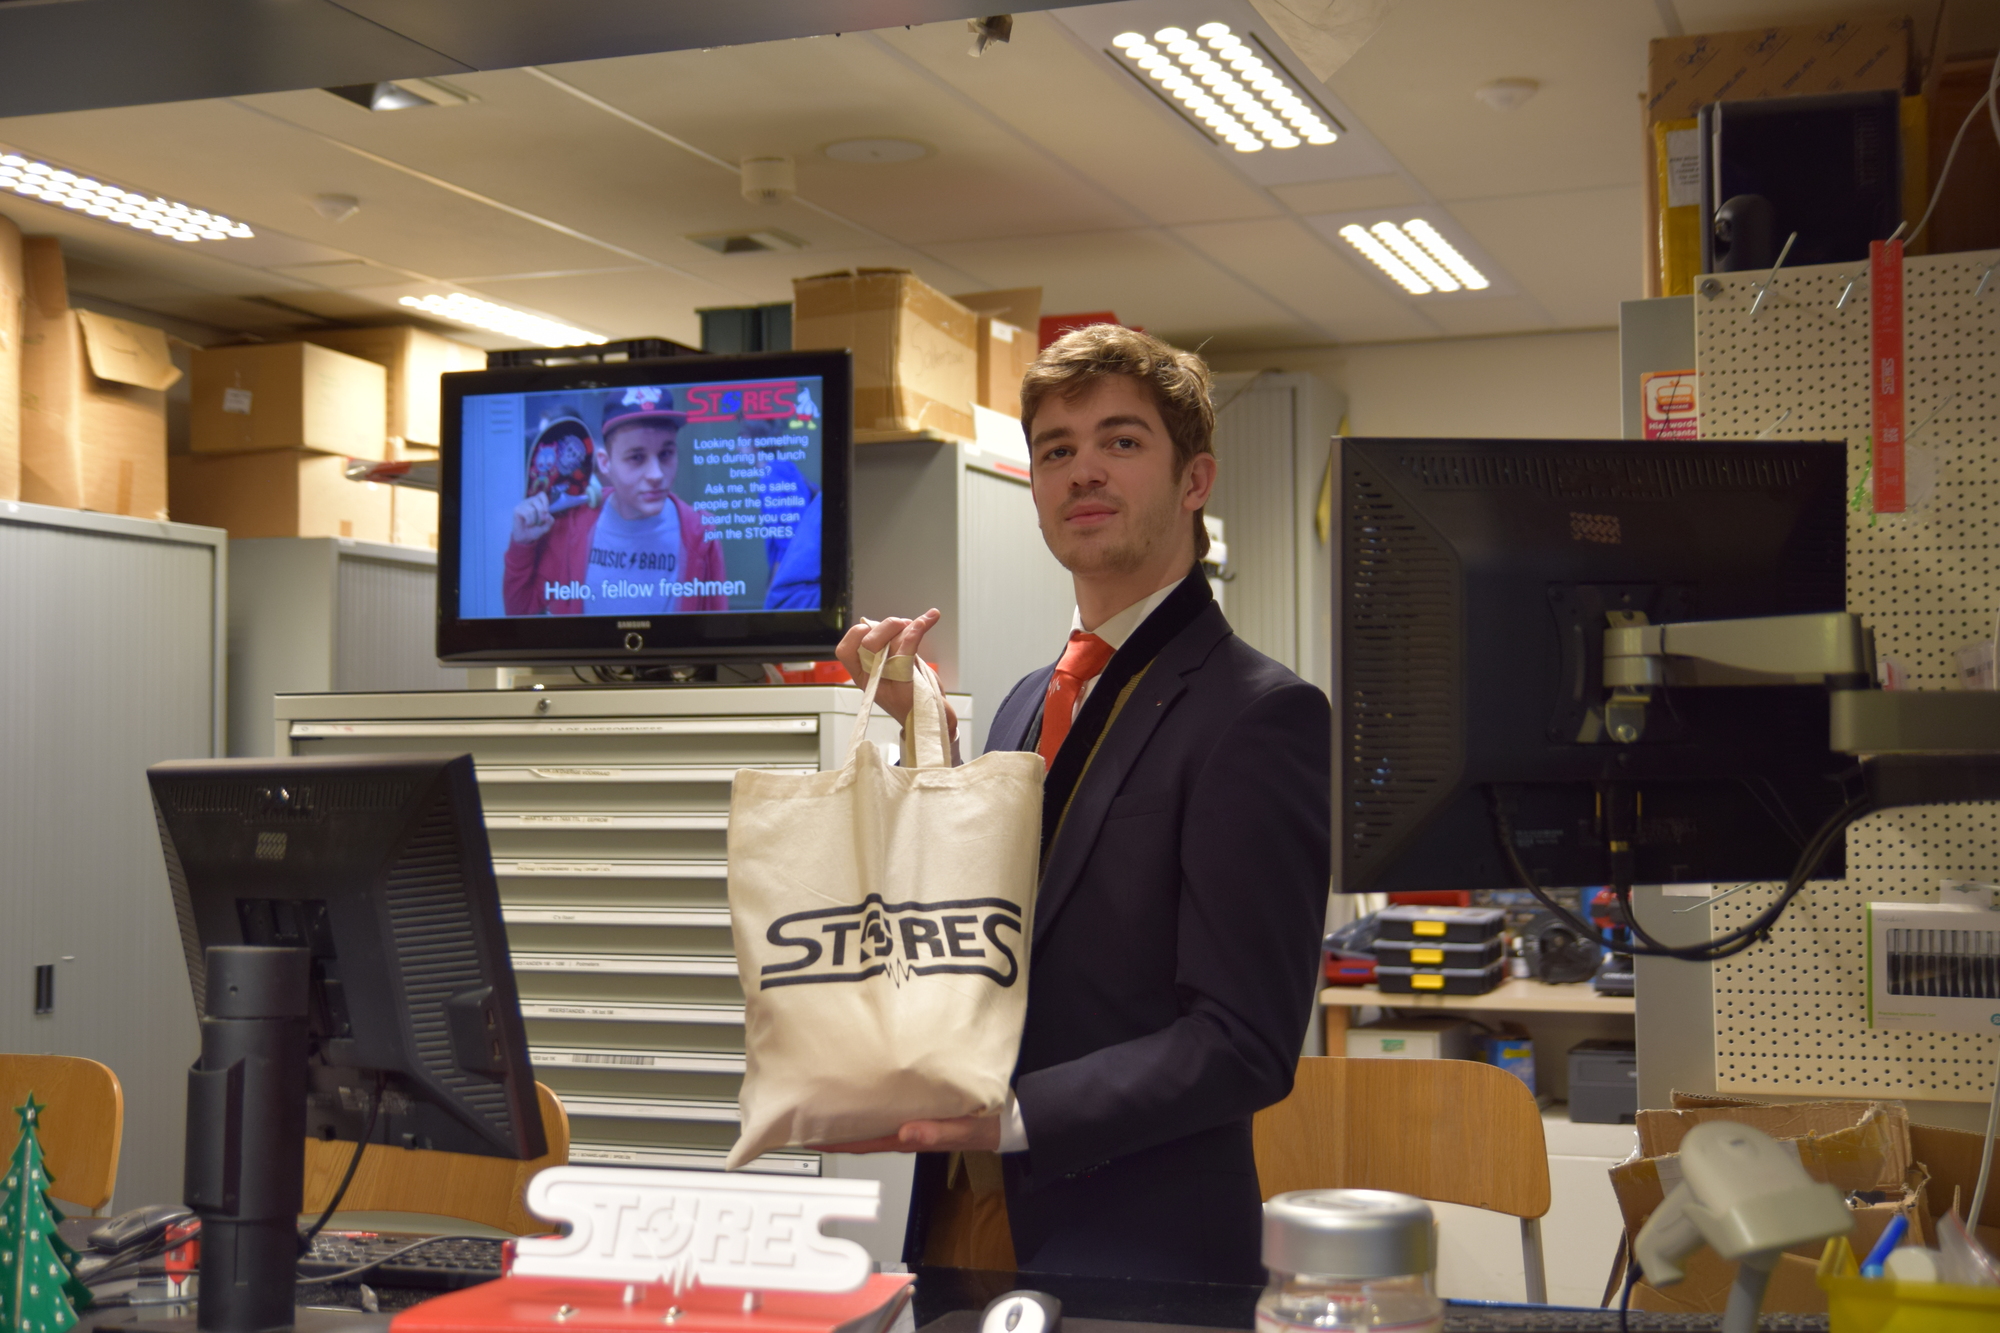 Figure 1: The administrator happily showing a STORES bag